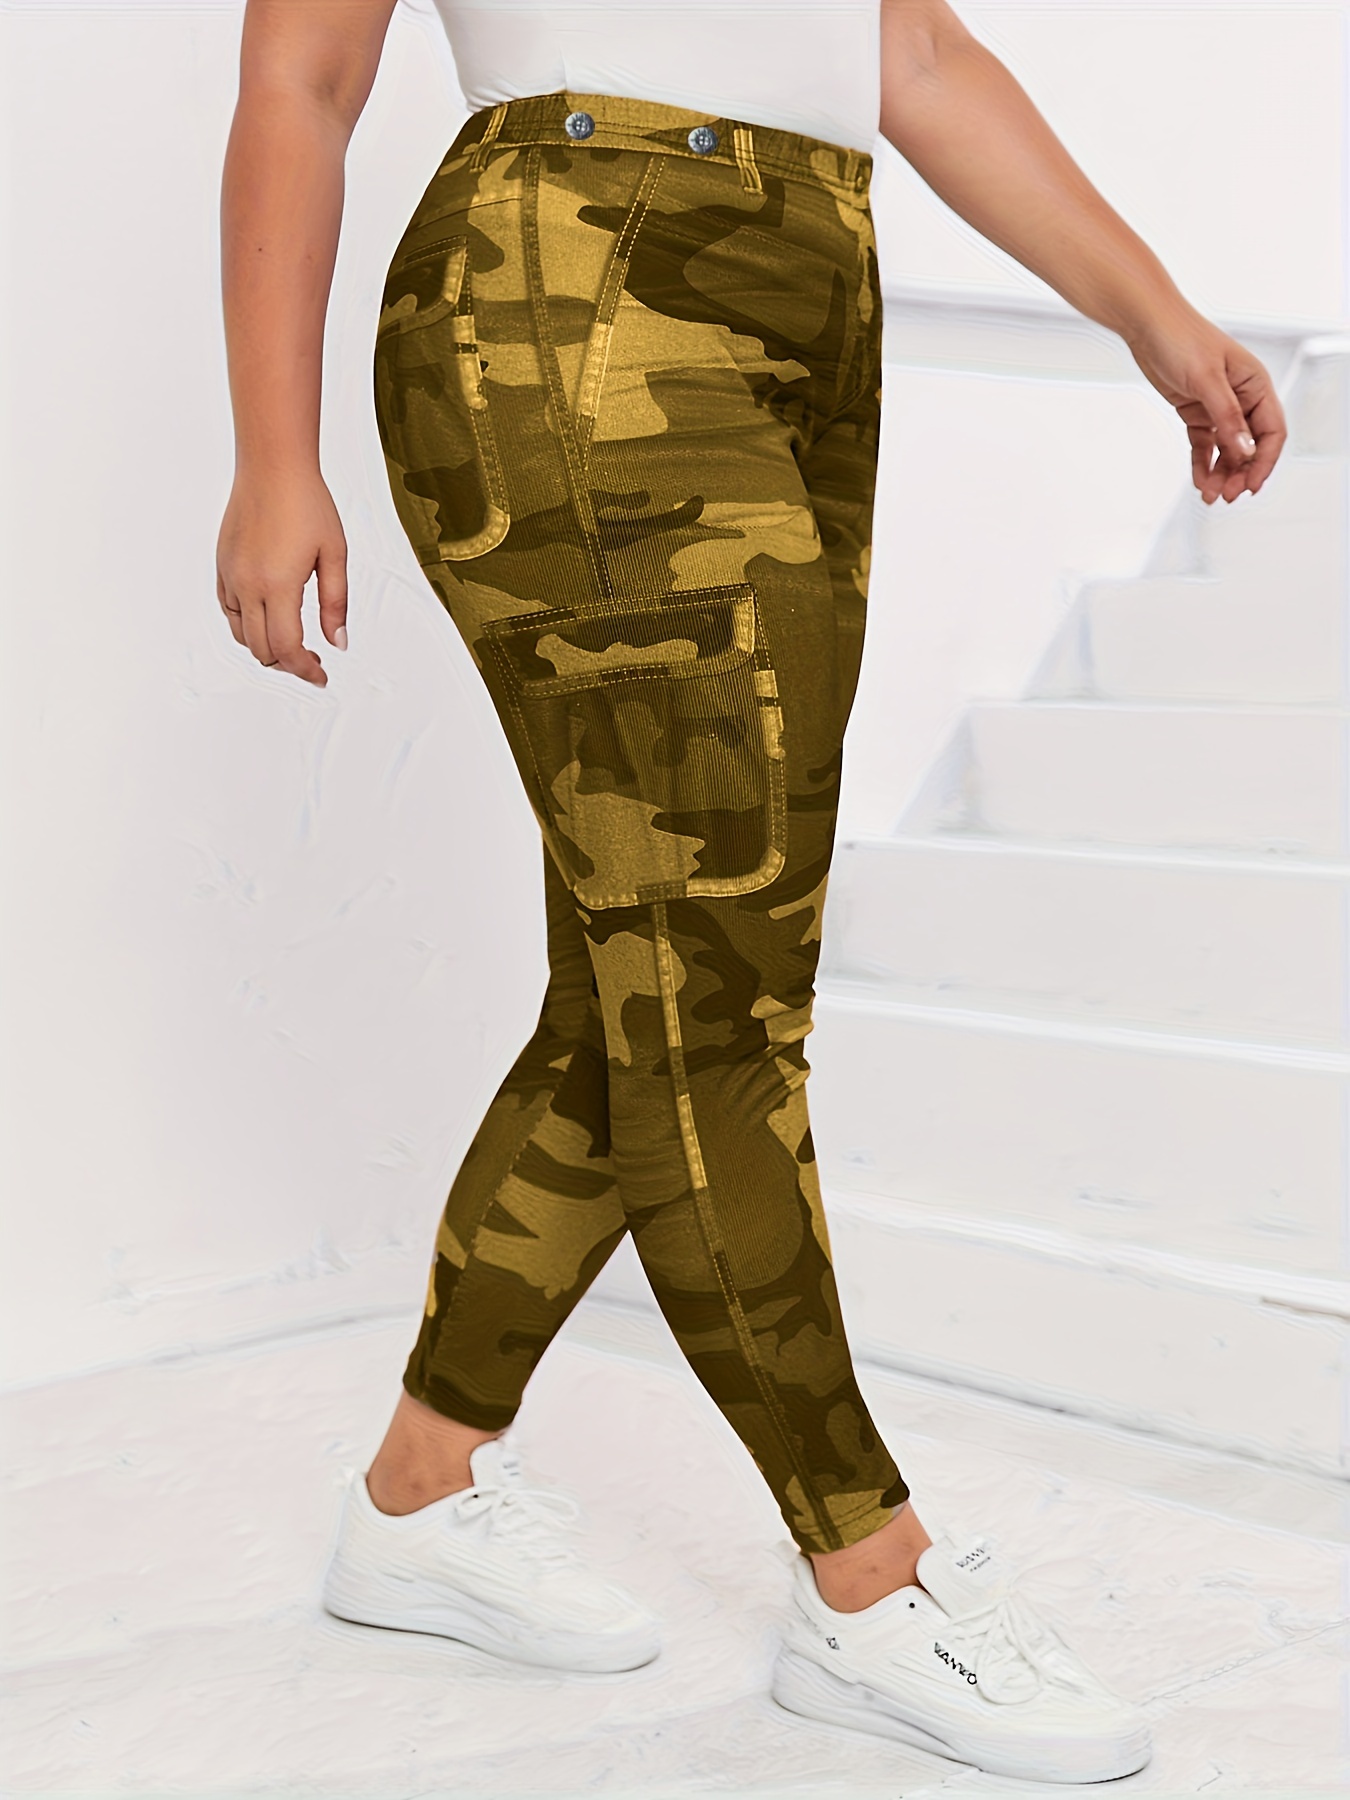  Womens Plus Size Cargo Leggings Casual Stretchy